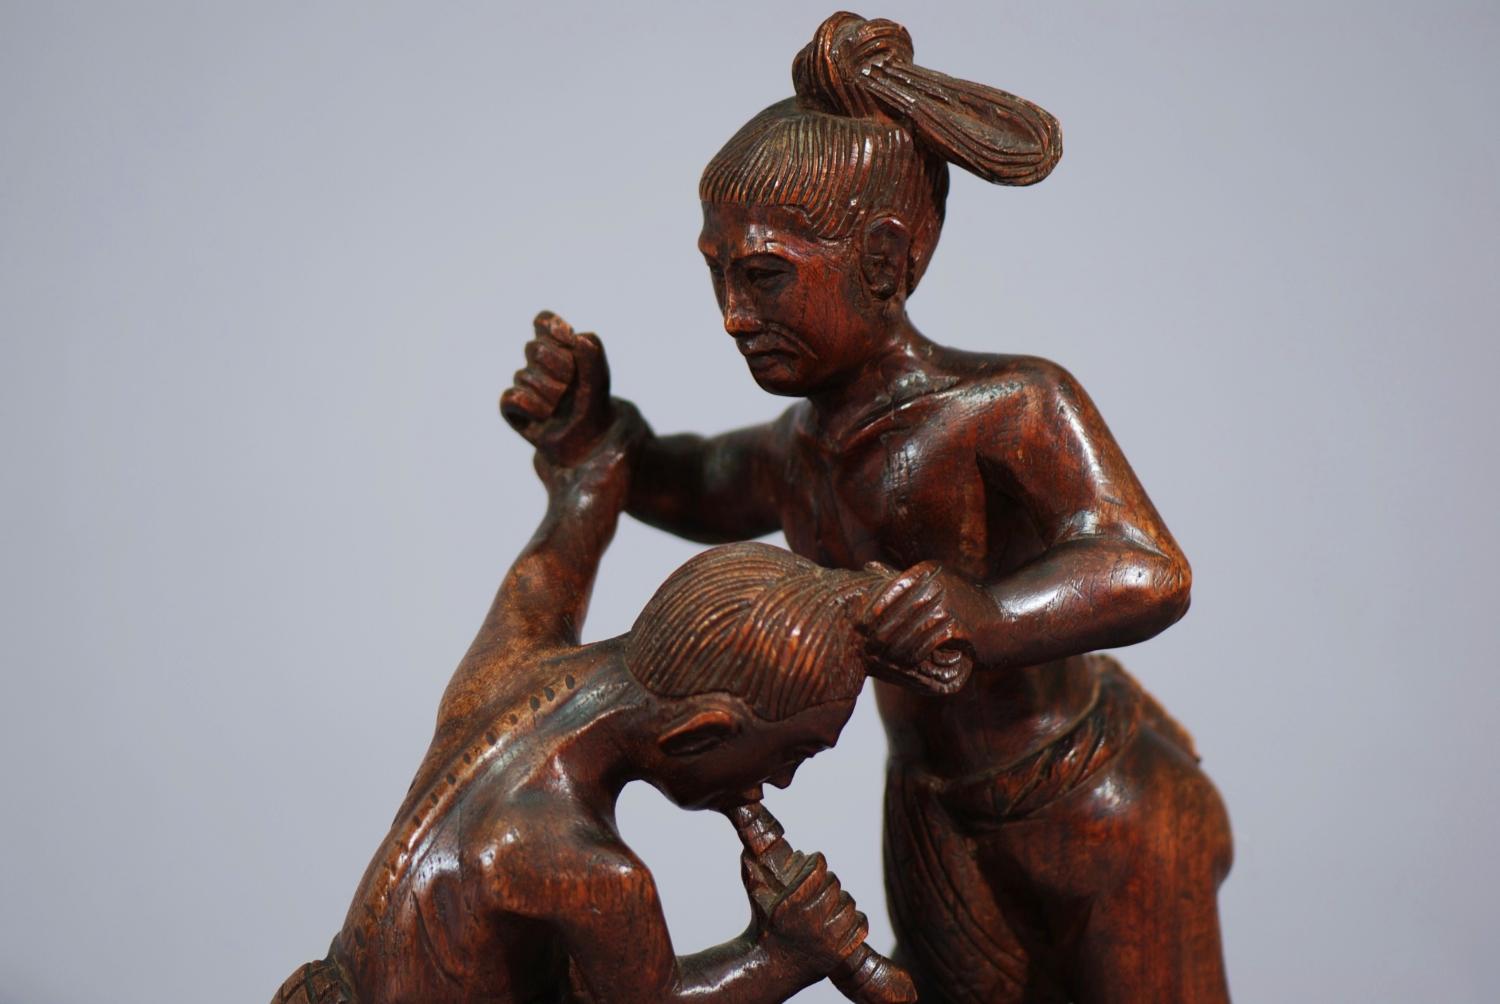 Hardwood carving of two wrestlers